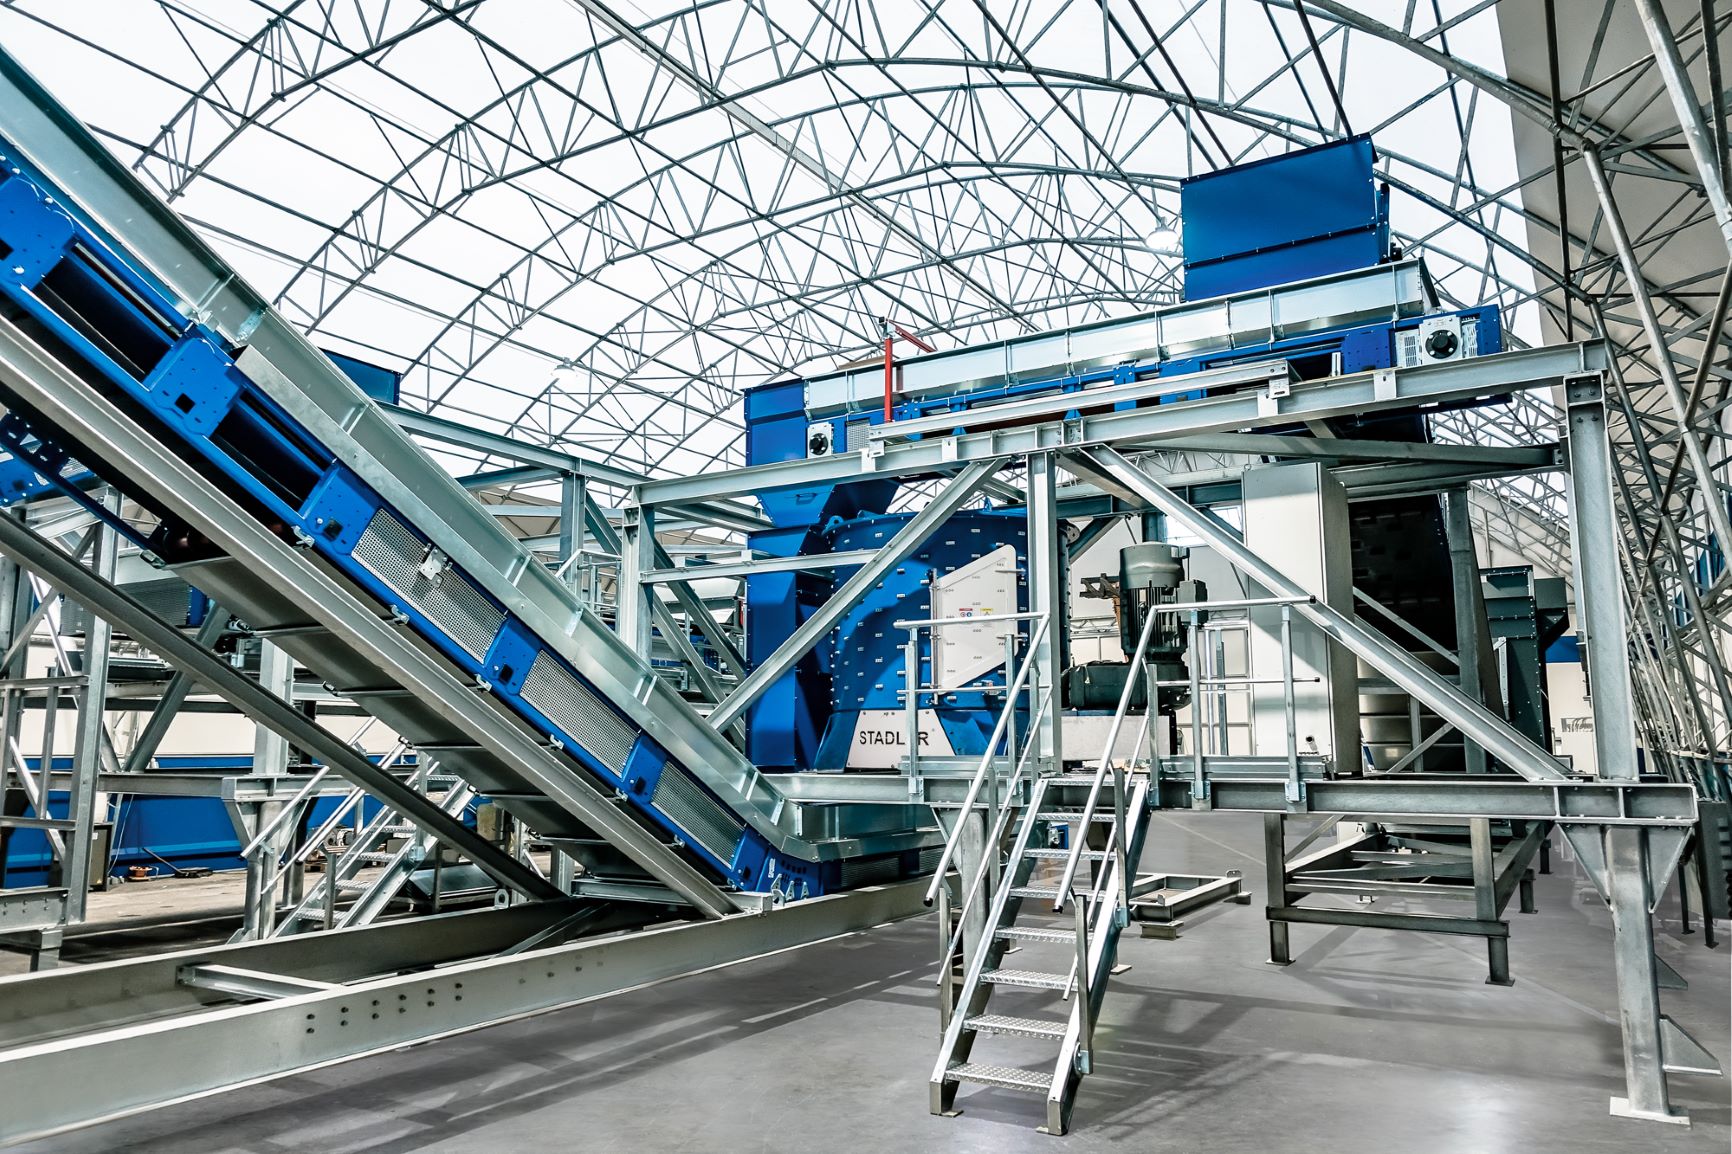 STADLER shares its vision of the recycling industry and strategic priorities